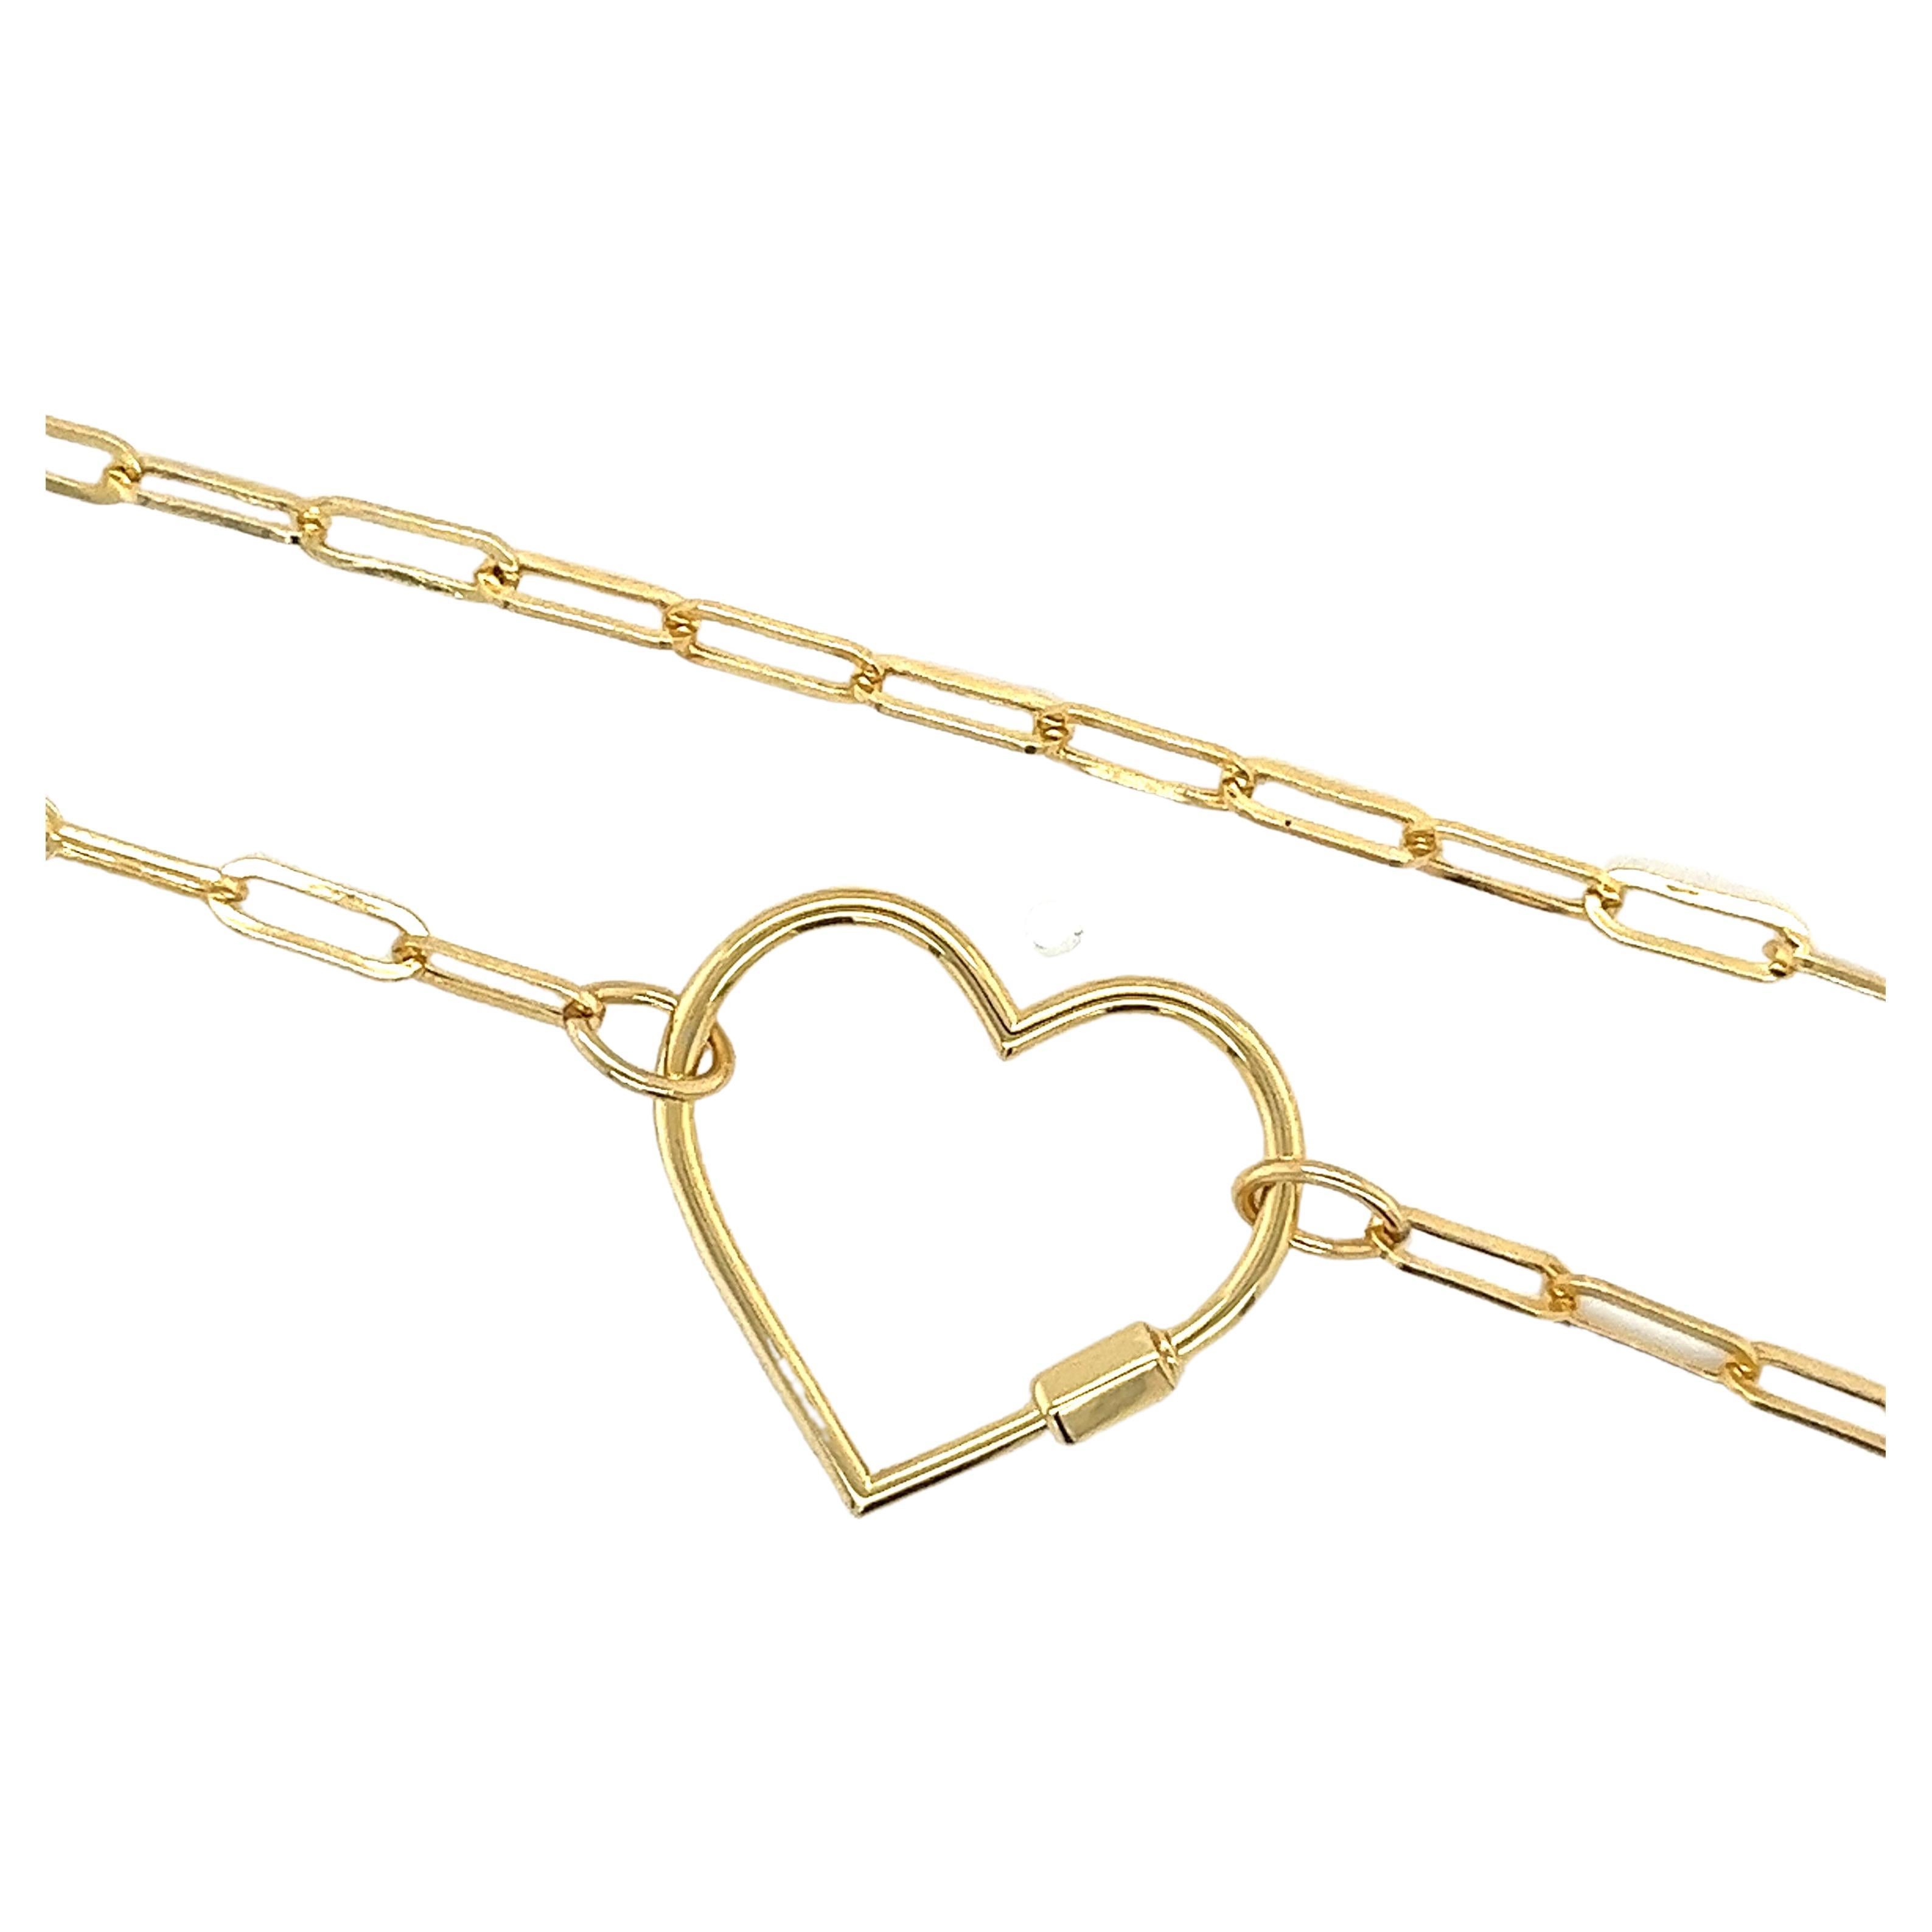 14 Karat Real Gold Heart Charm Necklace with Paper Clip Chain